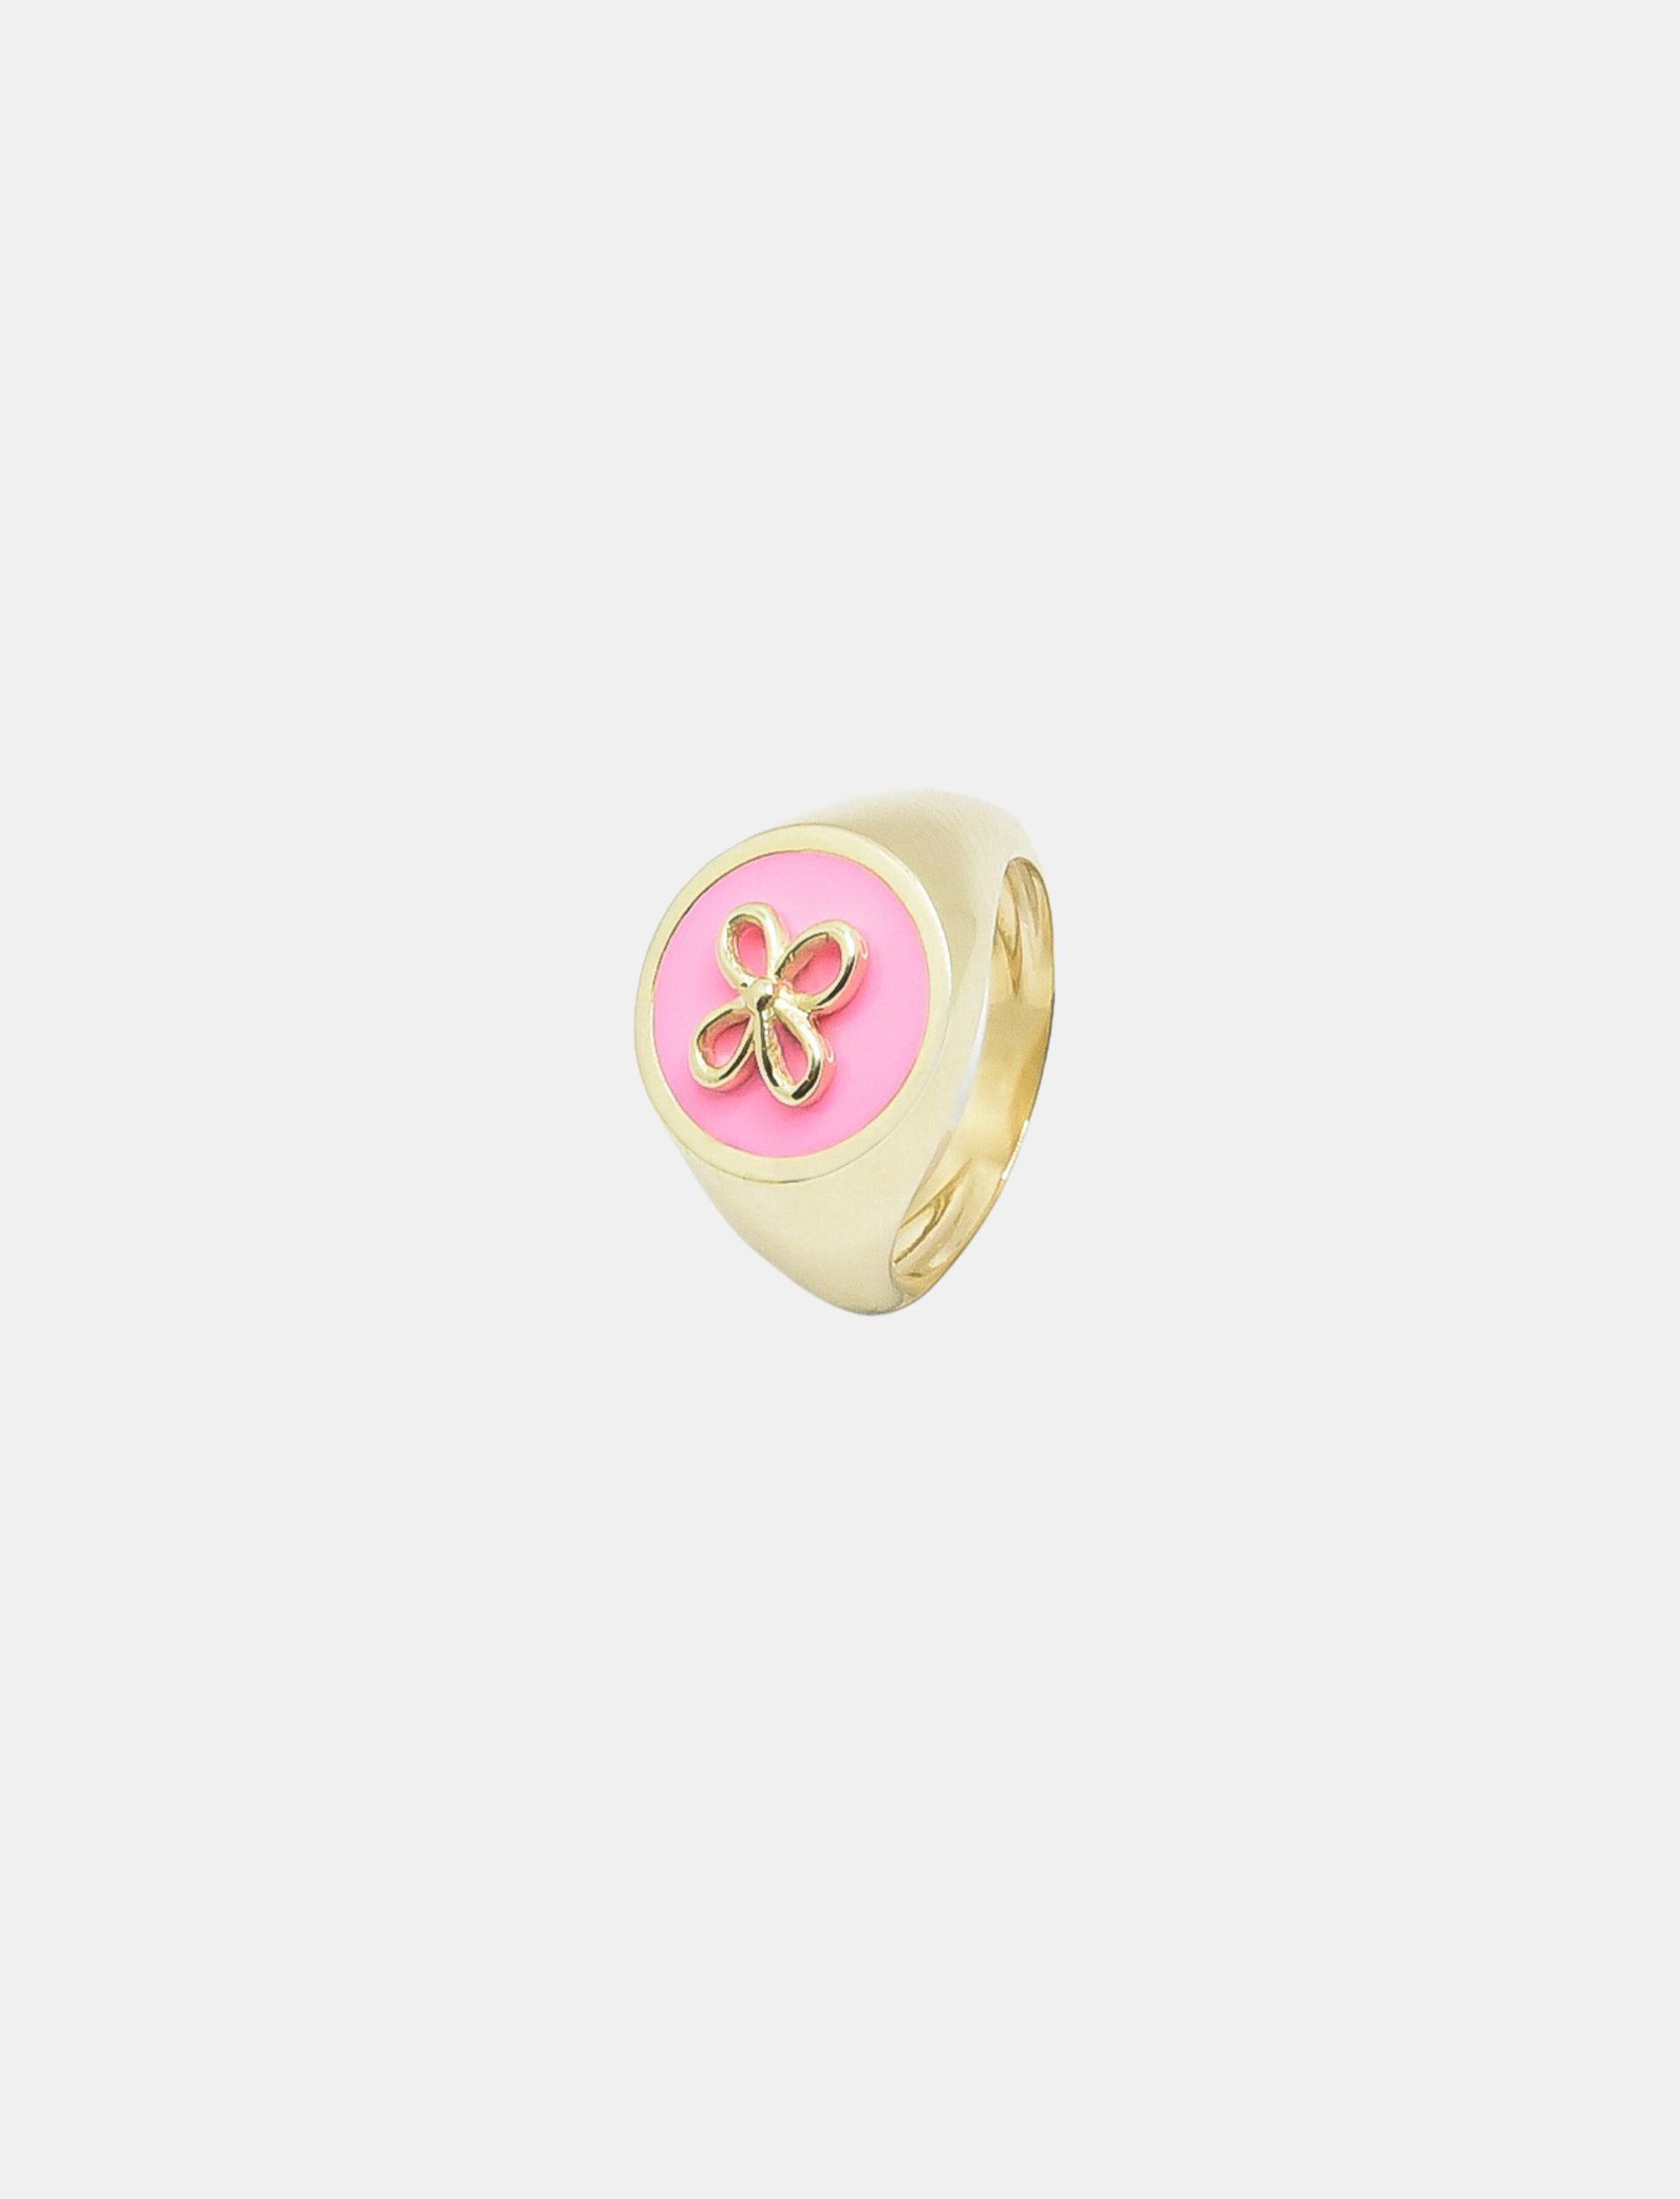 Chevalier Yellow Gold Signet Ring